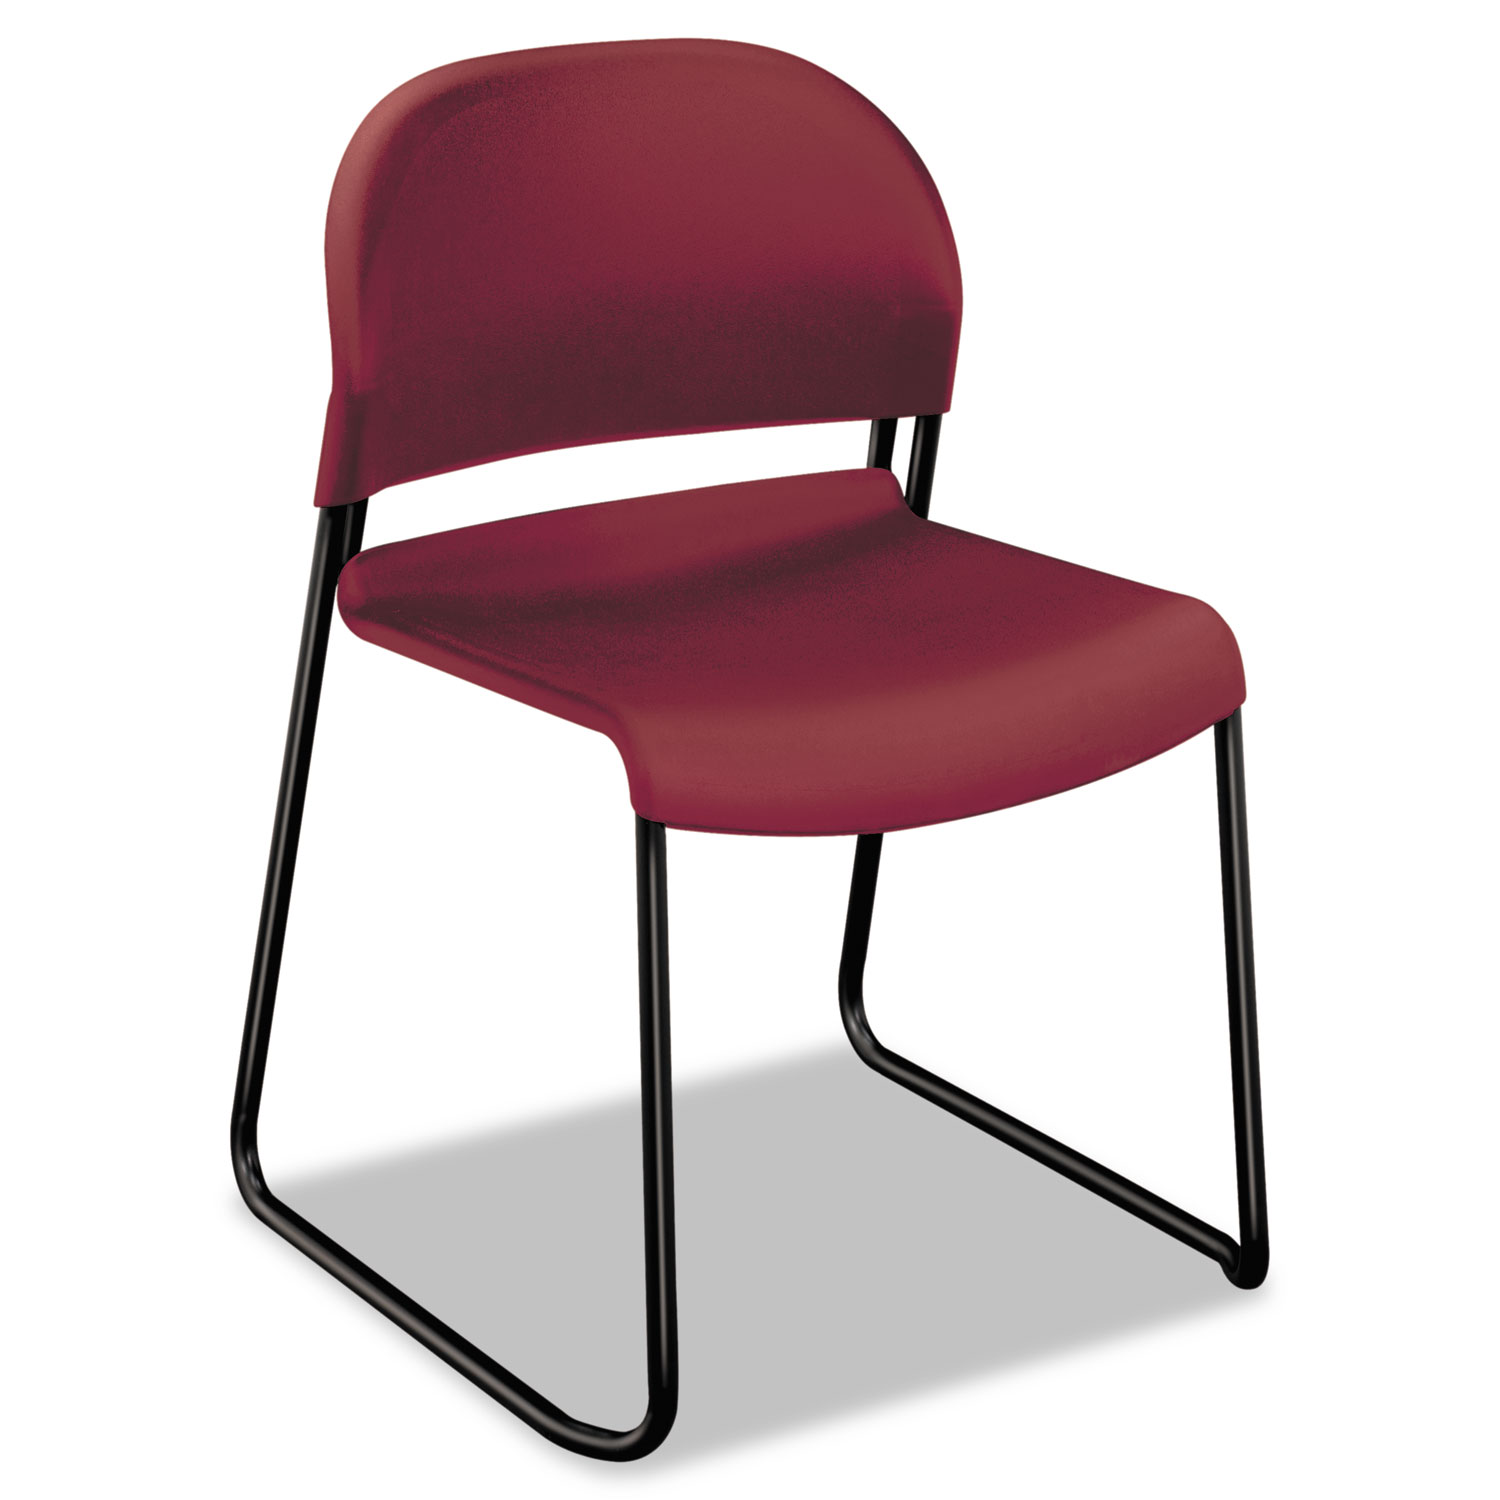  HON H4031.MB.T GuestStacker High Density Chairs, Mulberry Seat/Mulberry Back, Black Base, 4/Carton (HON4031MBT) 